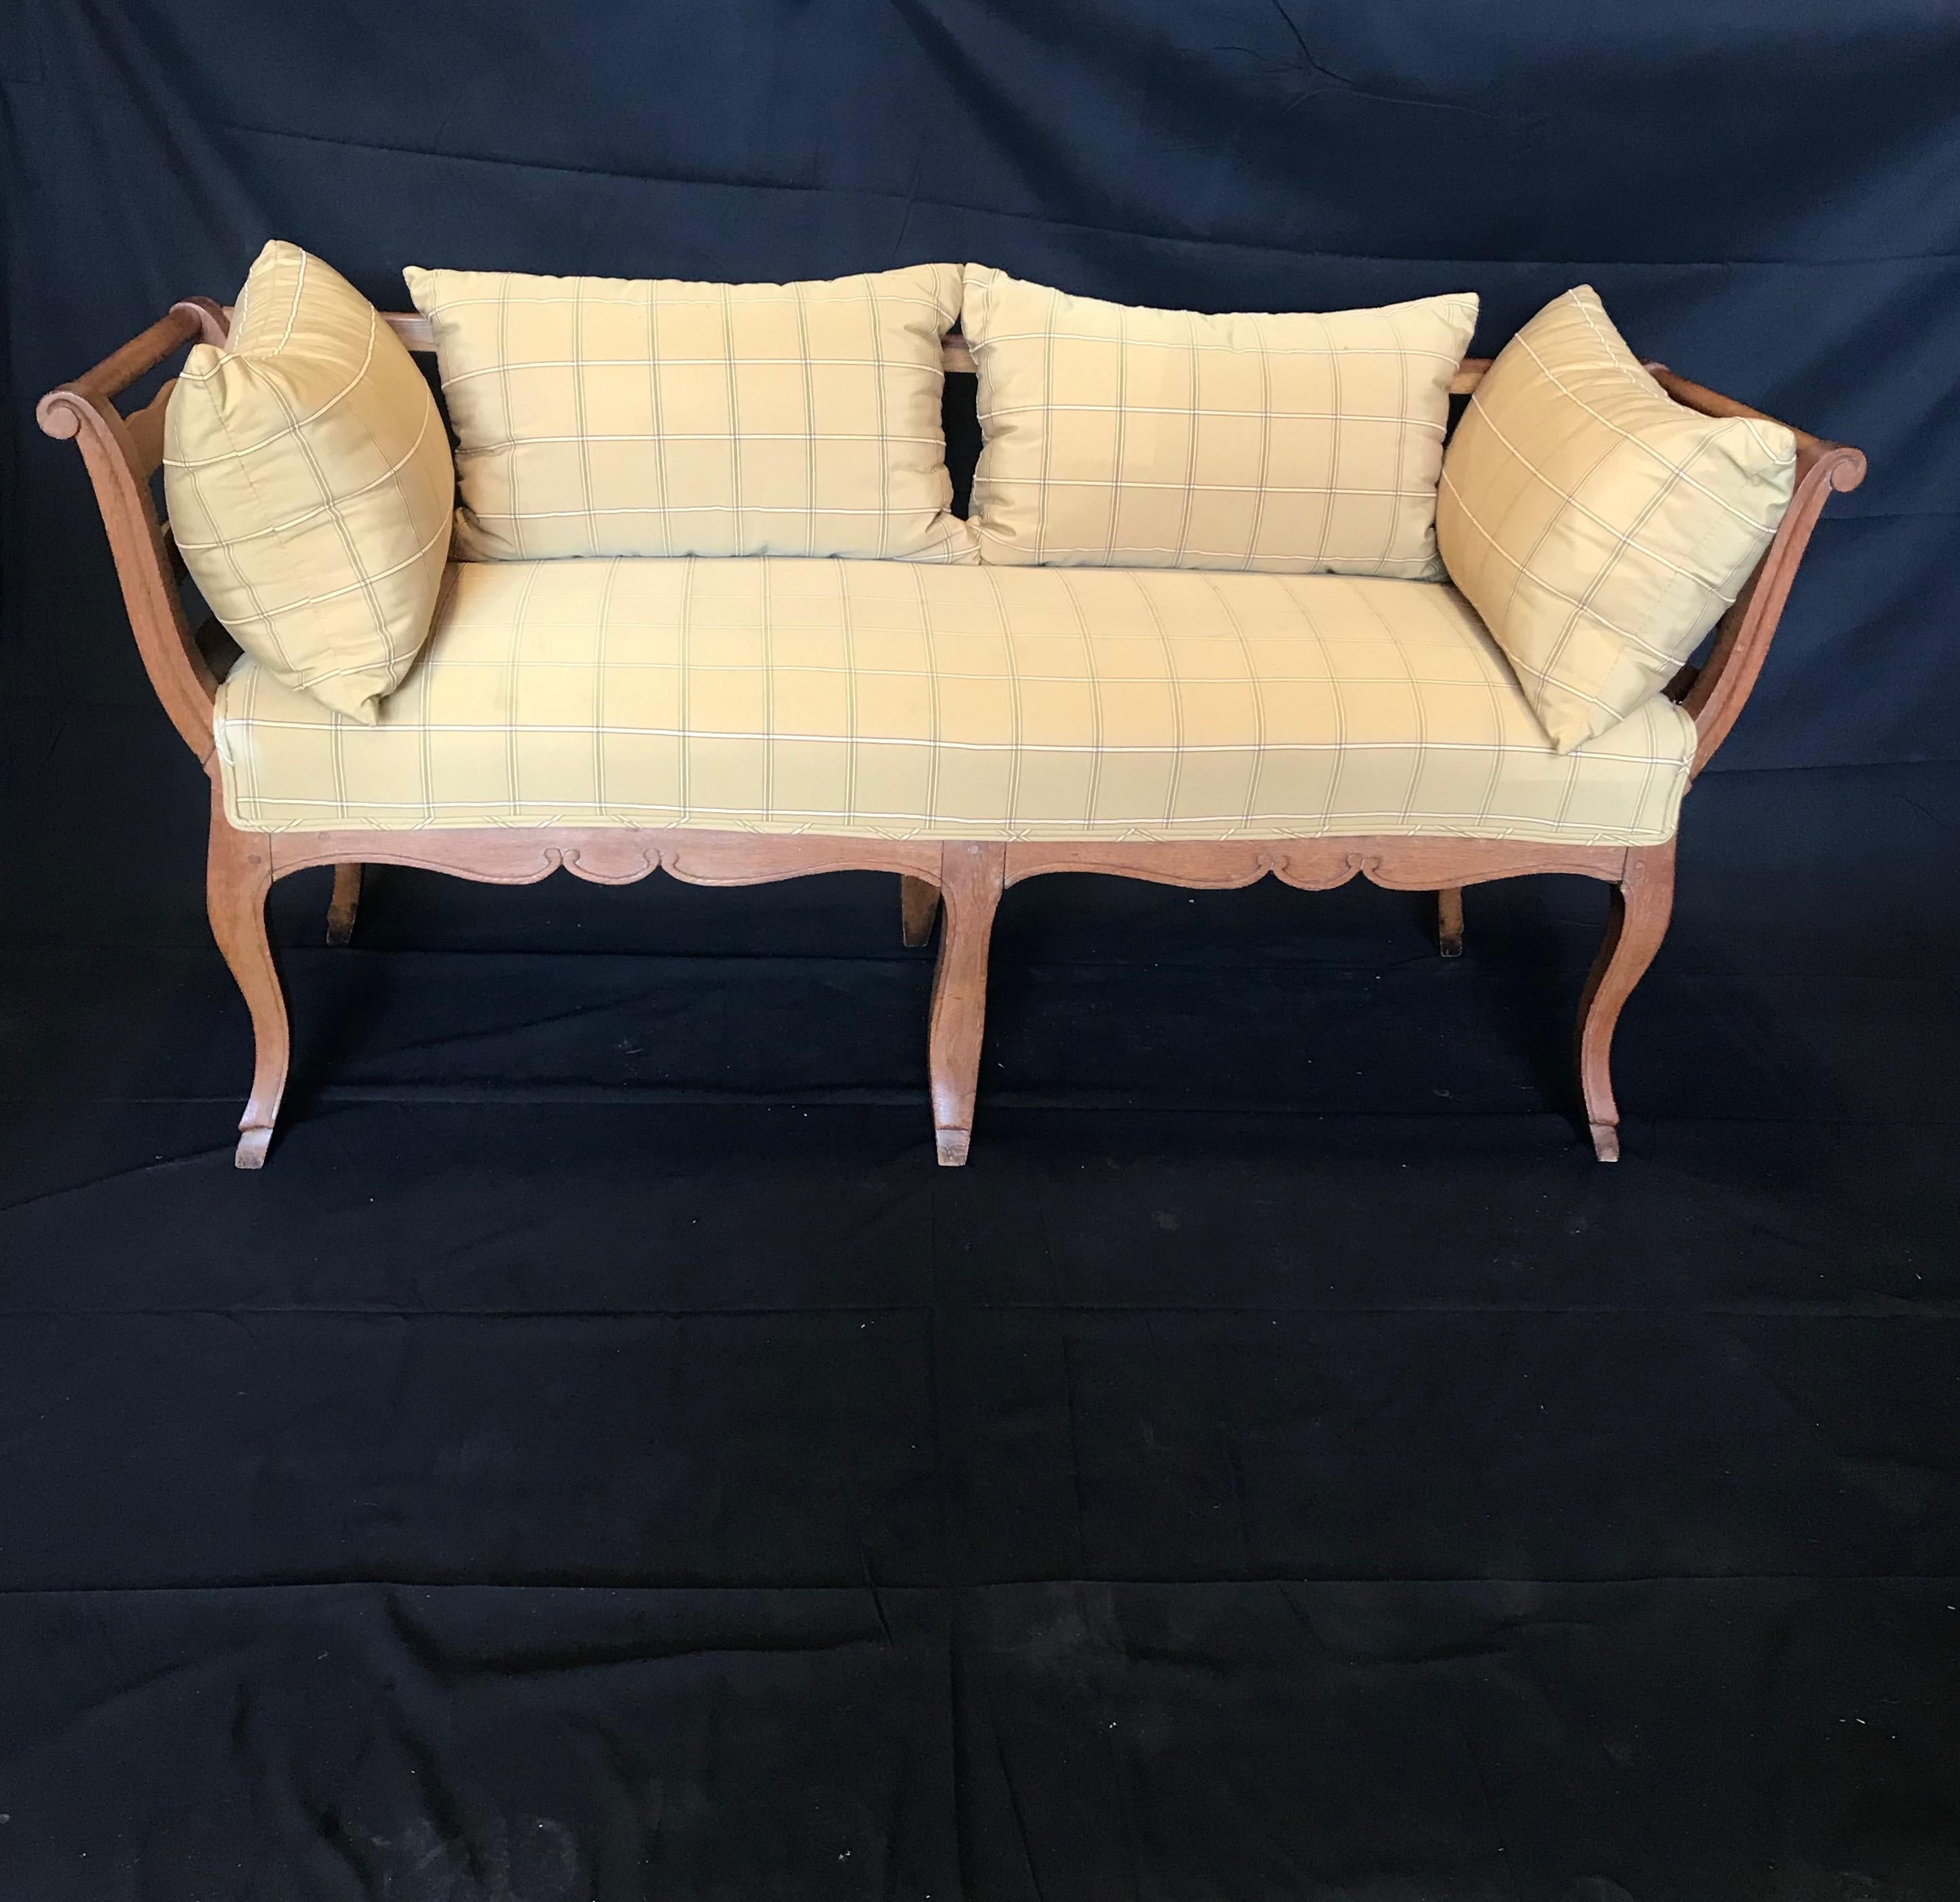 Upholstery Stunning Pair of French Country 19th Century Louis XV Settees Loveseats